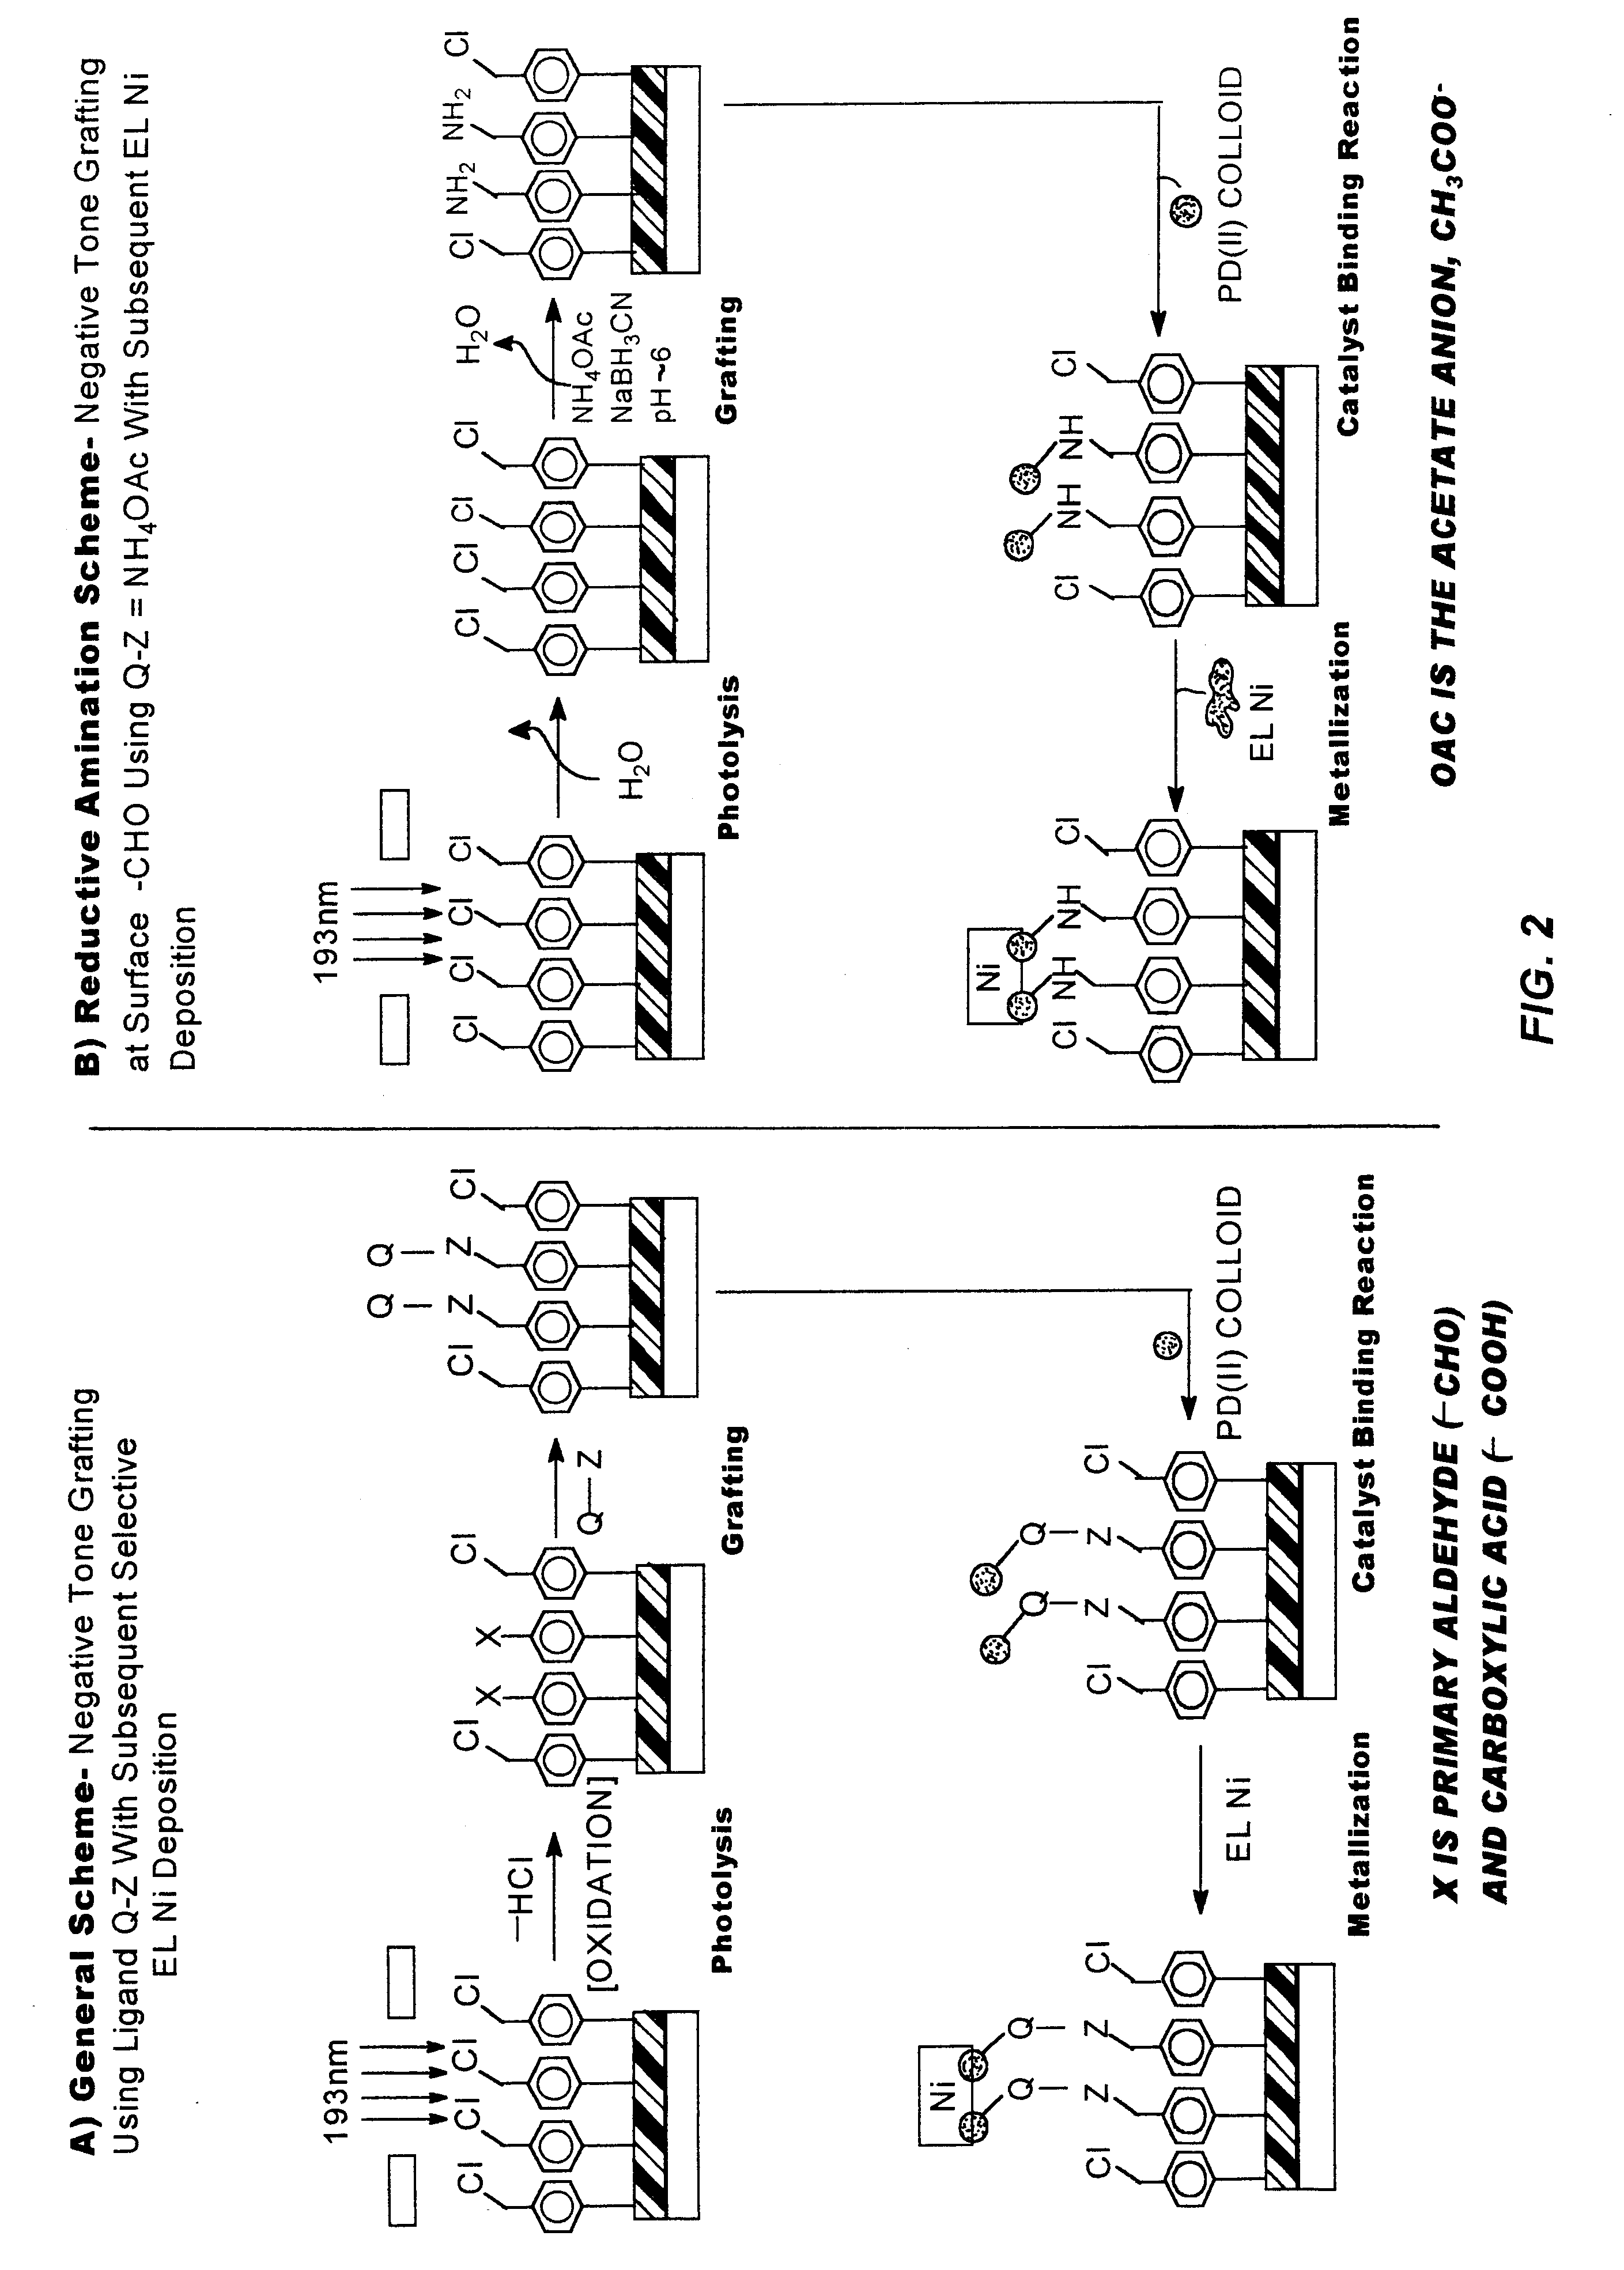 Methods and materials for selective modification of photopatterned polymer films